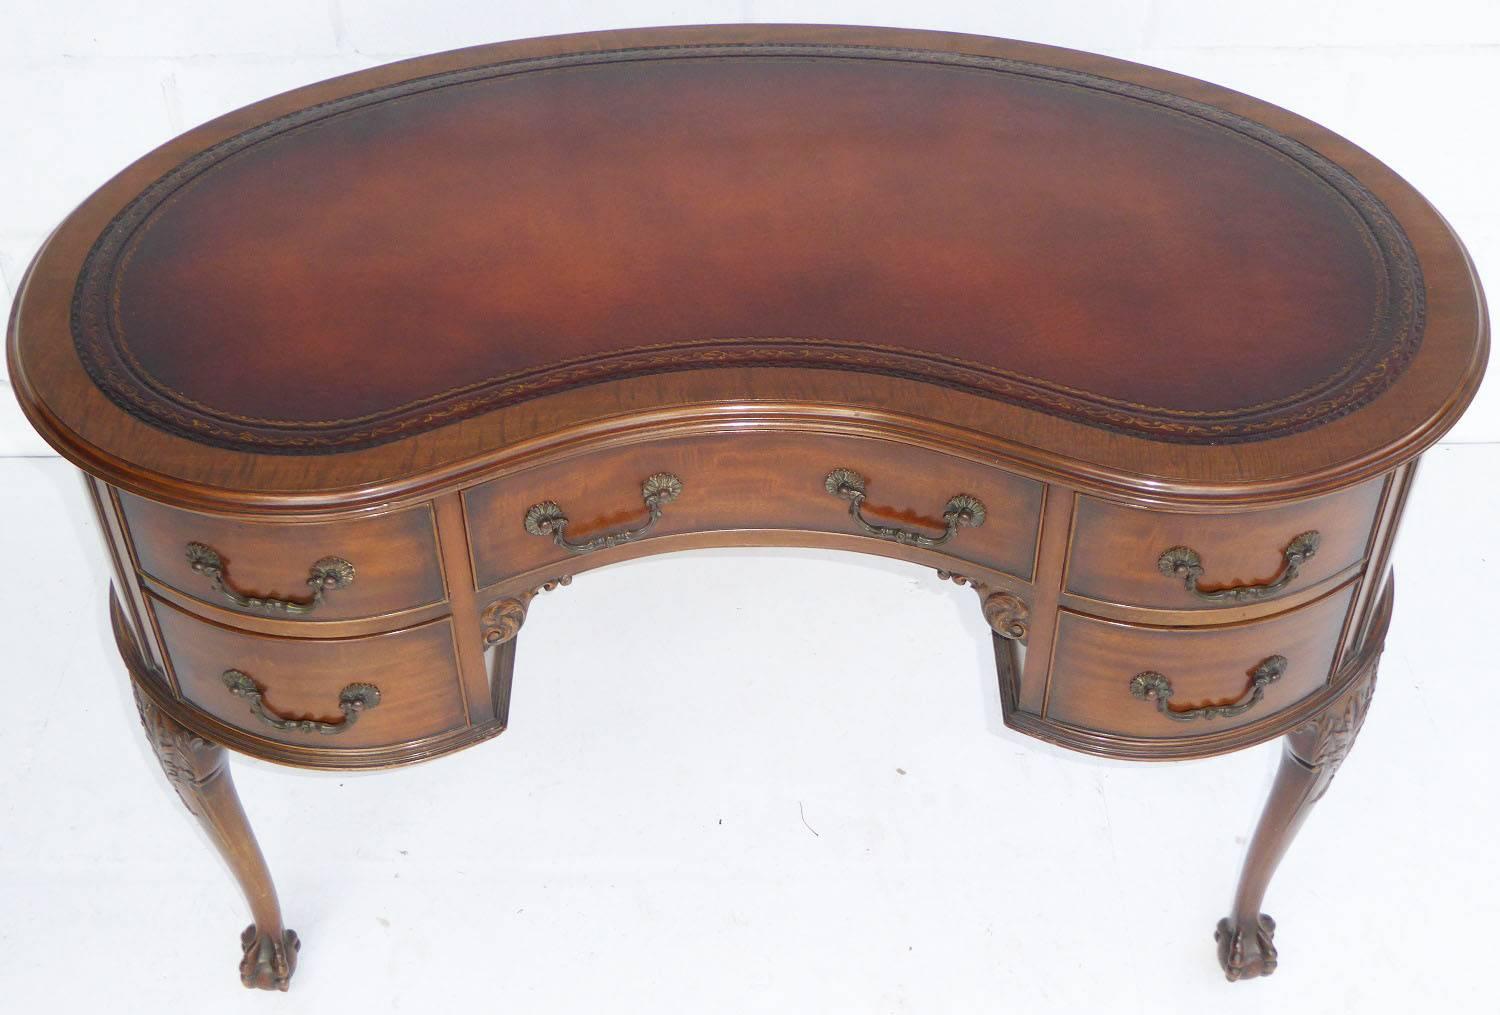 Edwardian 20th Century Mahogany Kidney Shaped Desk by Waring & Gillows, Liverpool